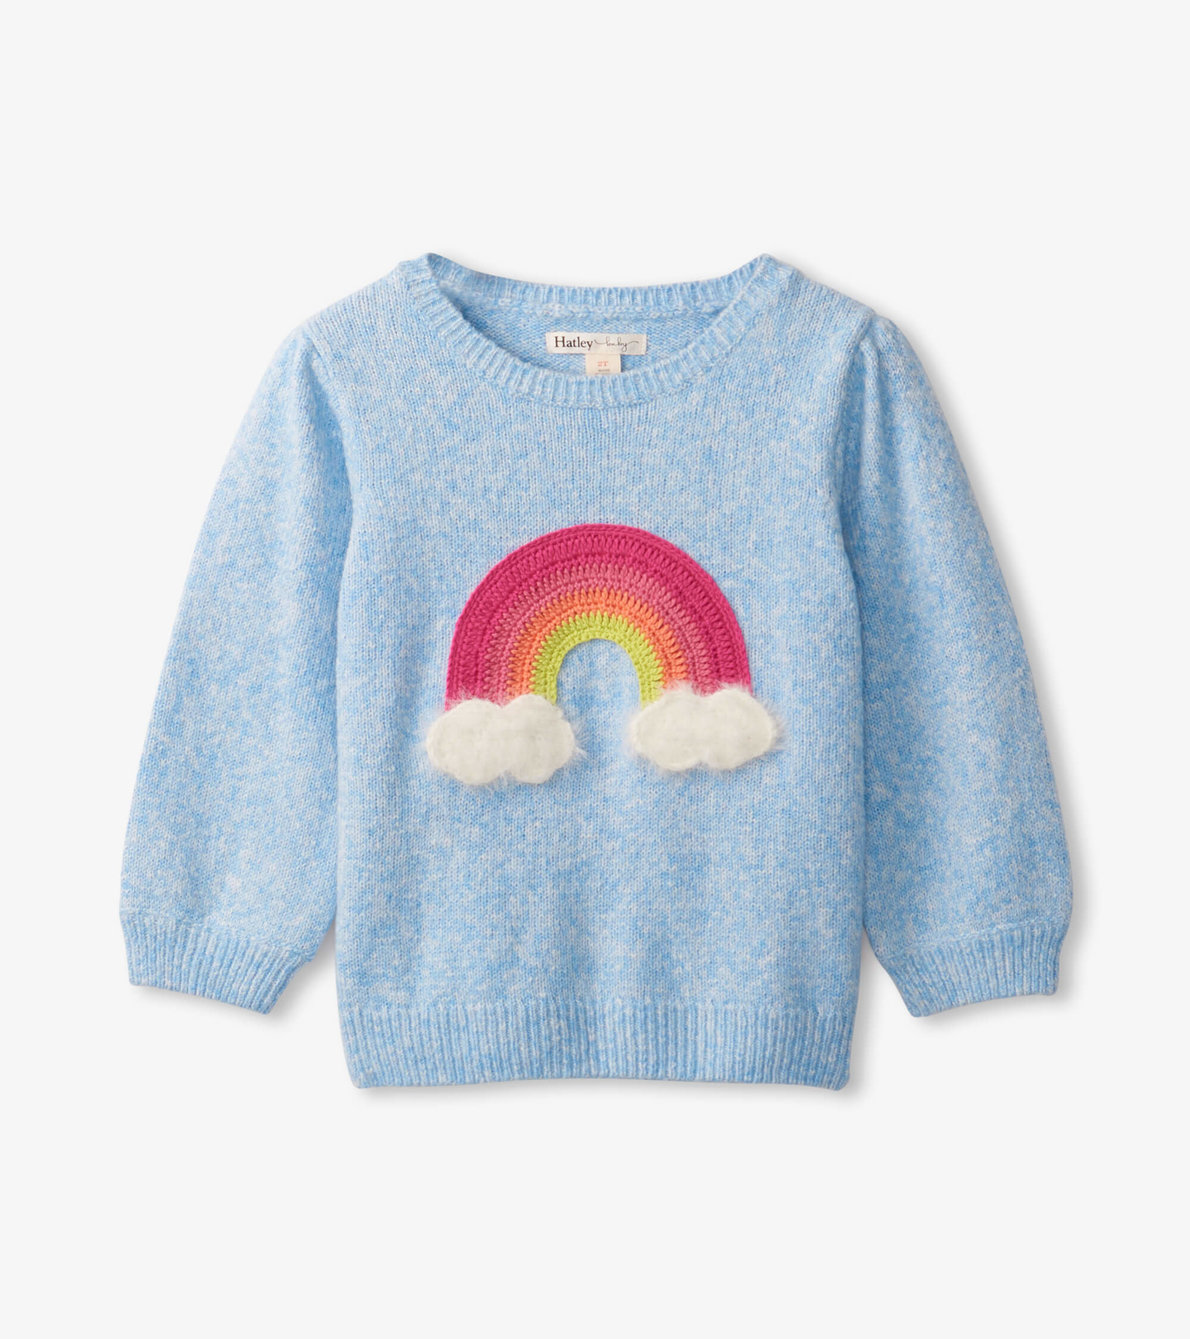 View larger image of Pretty Rainbow Sweater